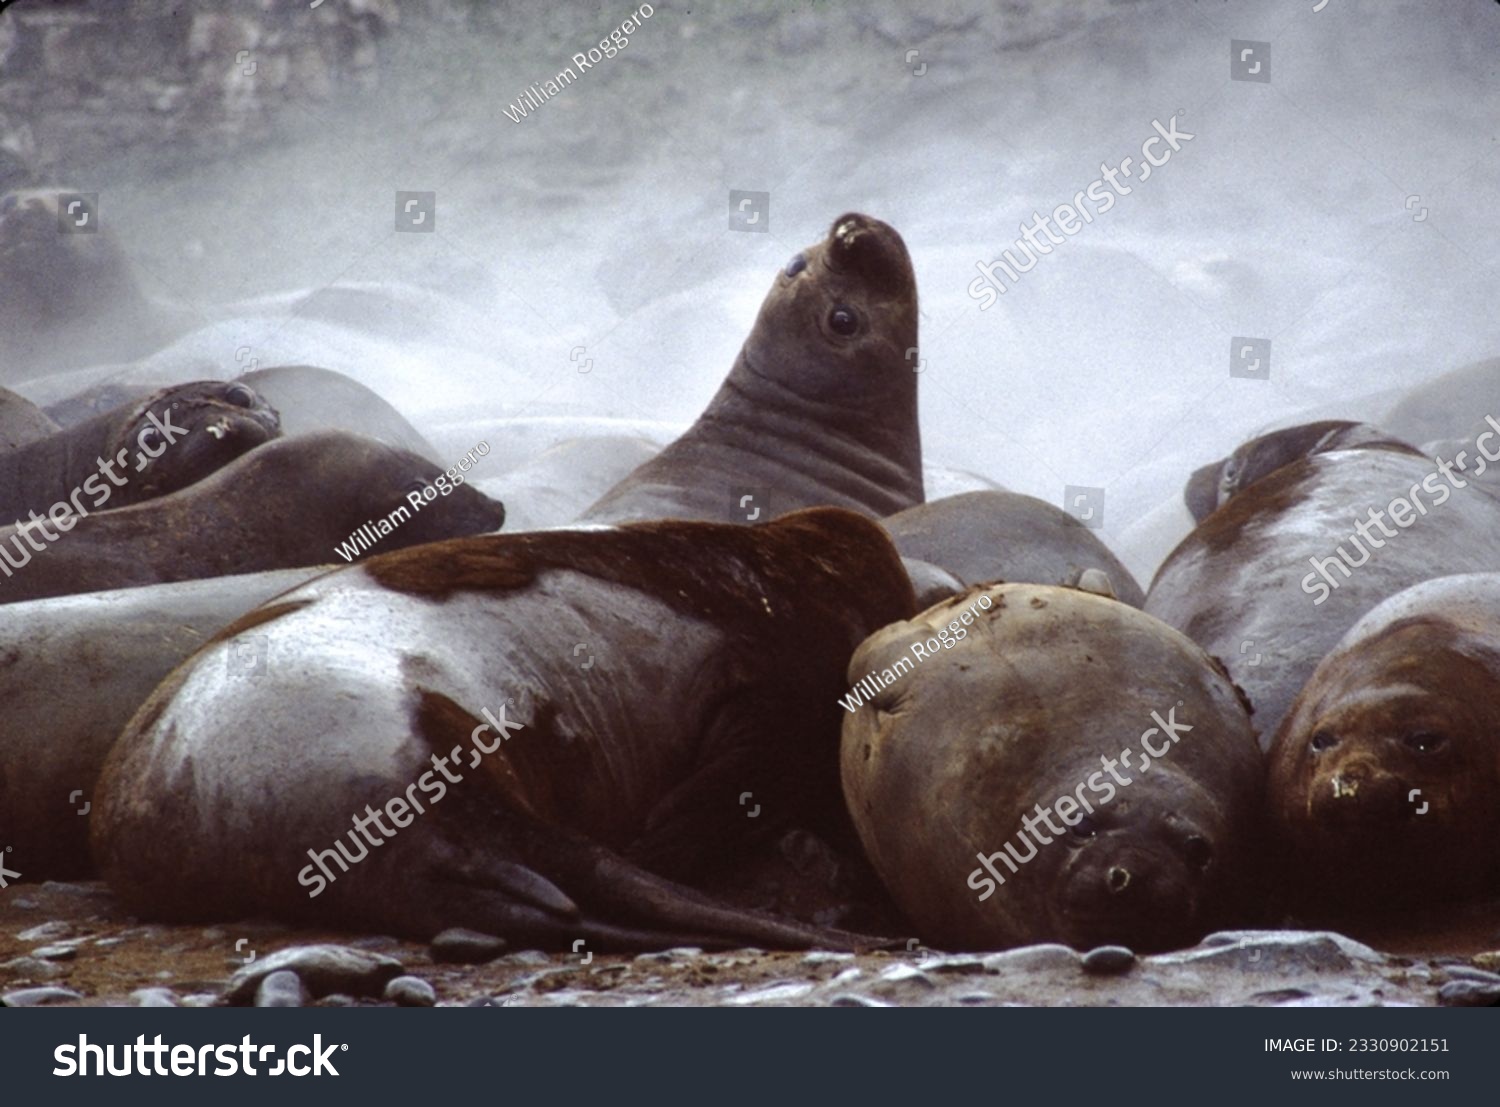 Northern fur seals have a stocky body, small head, very short snout, and extremely dense fur that ends at the wrist lines of their flippers. Their hind flippers can be up to one-fourth body length. #2330902151